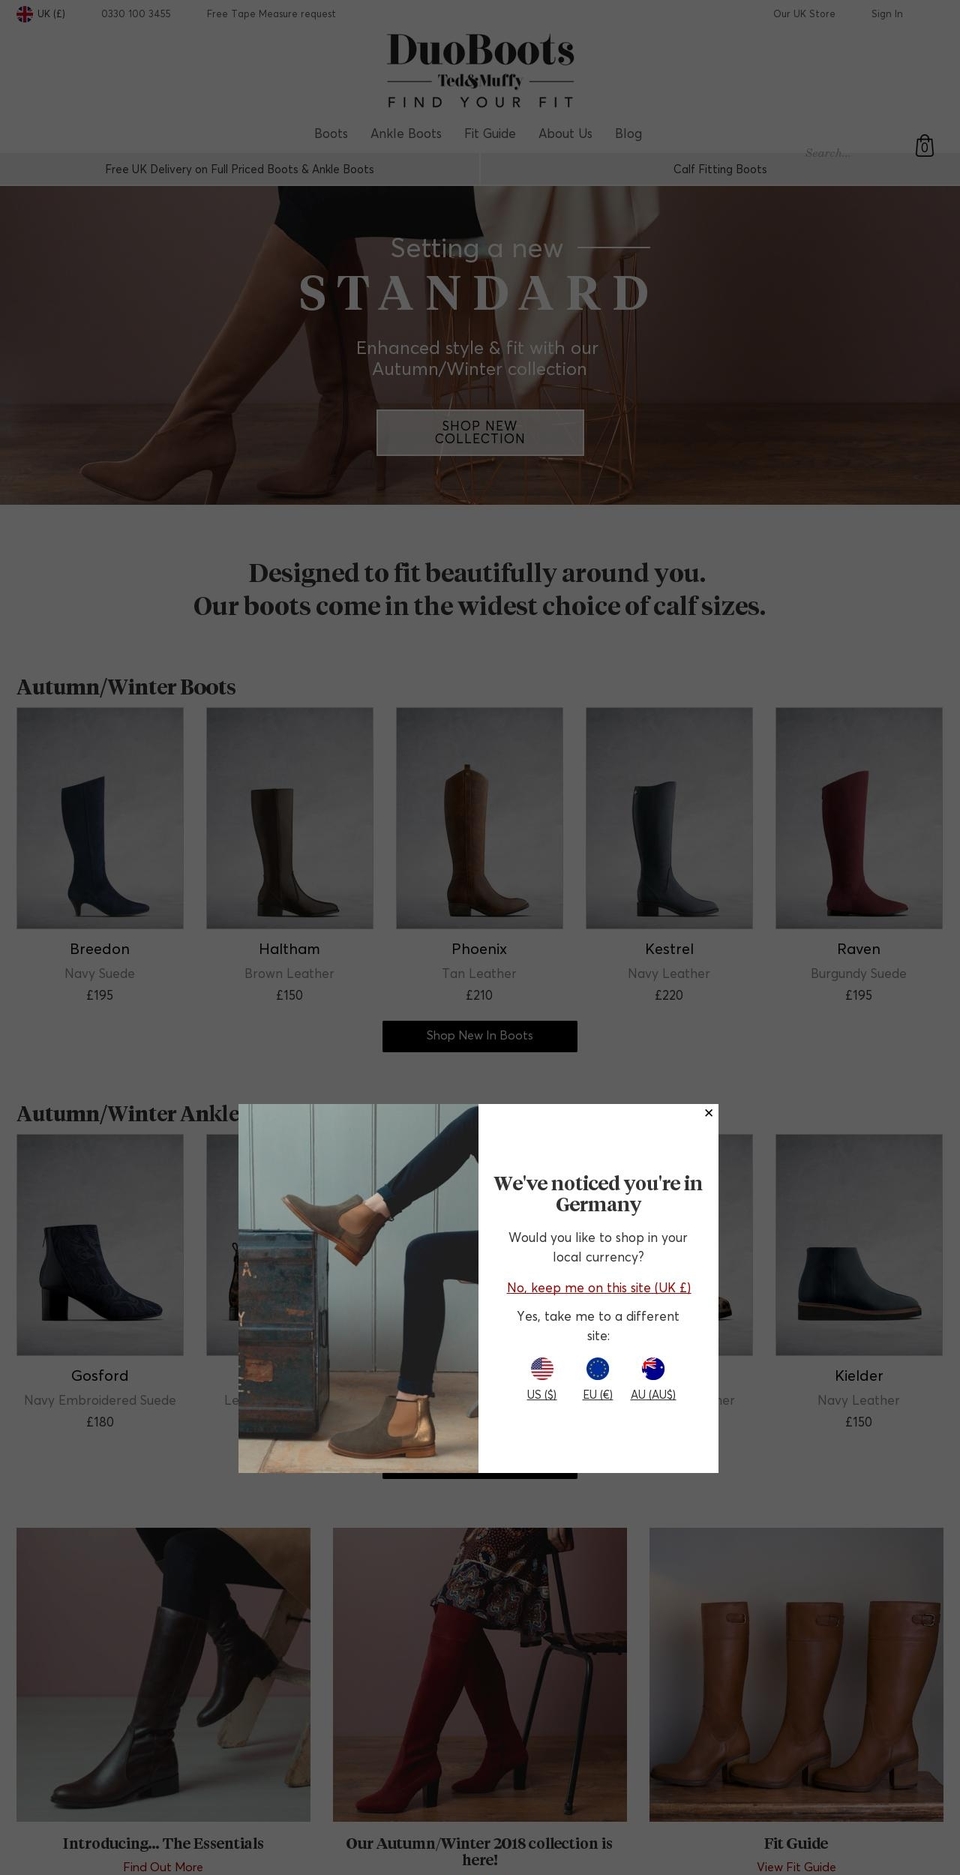 DuoBoots GBP V4.2 Shopify theme site example duoboots.boutique